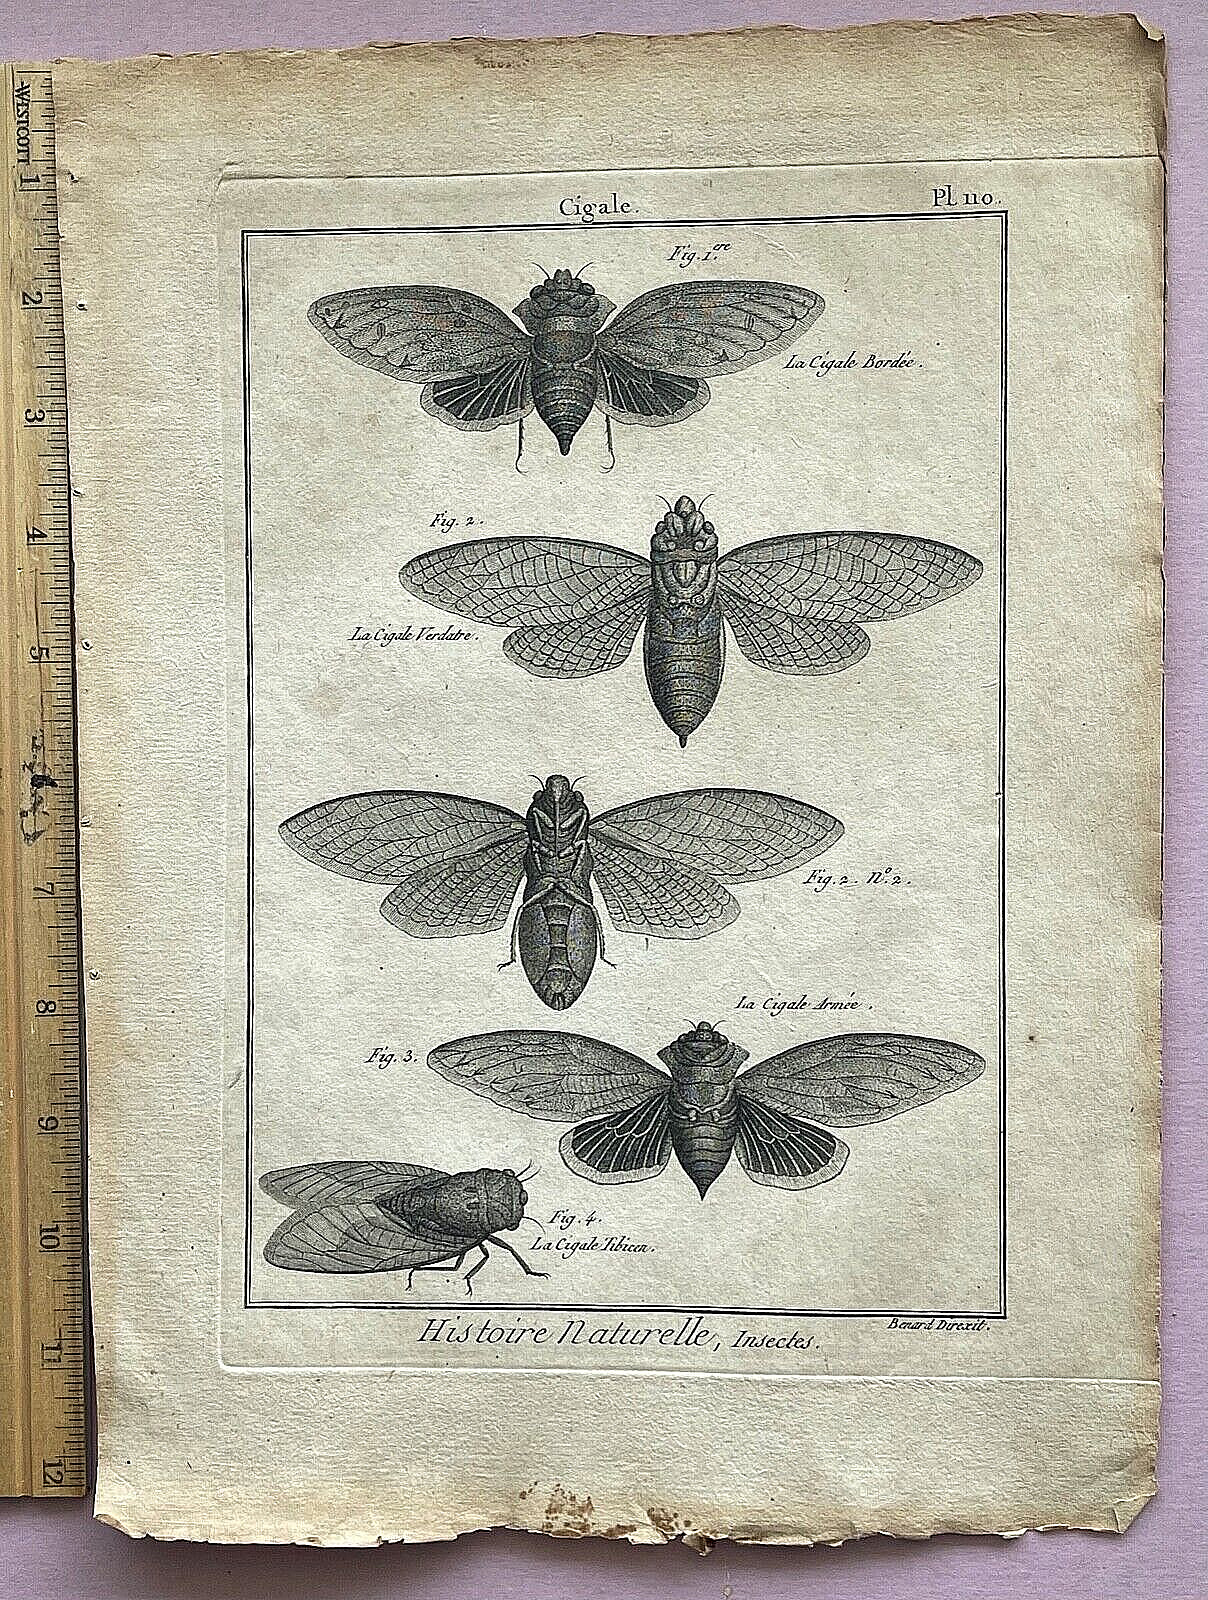 RARE 1751 ANTIQUE Martinet-Diderot CICADA INSECT PRINT - LOTS of CHARACTER PL110